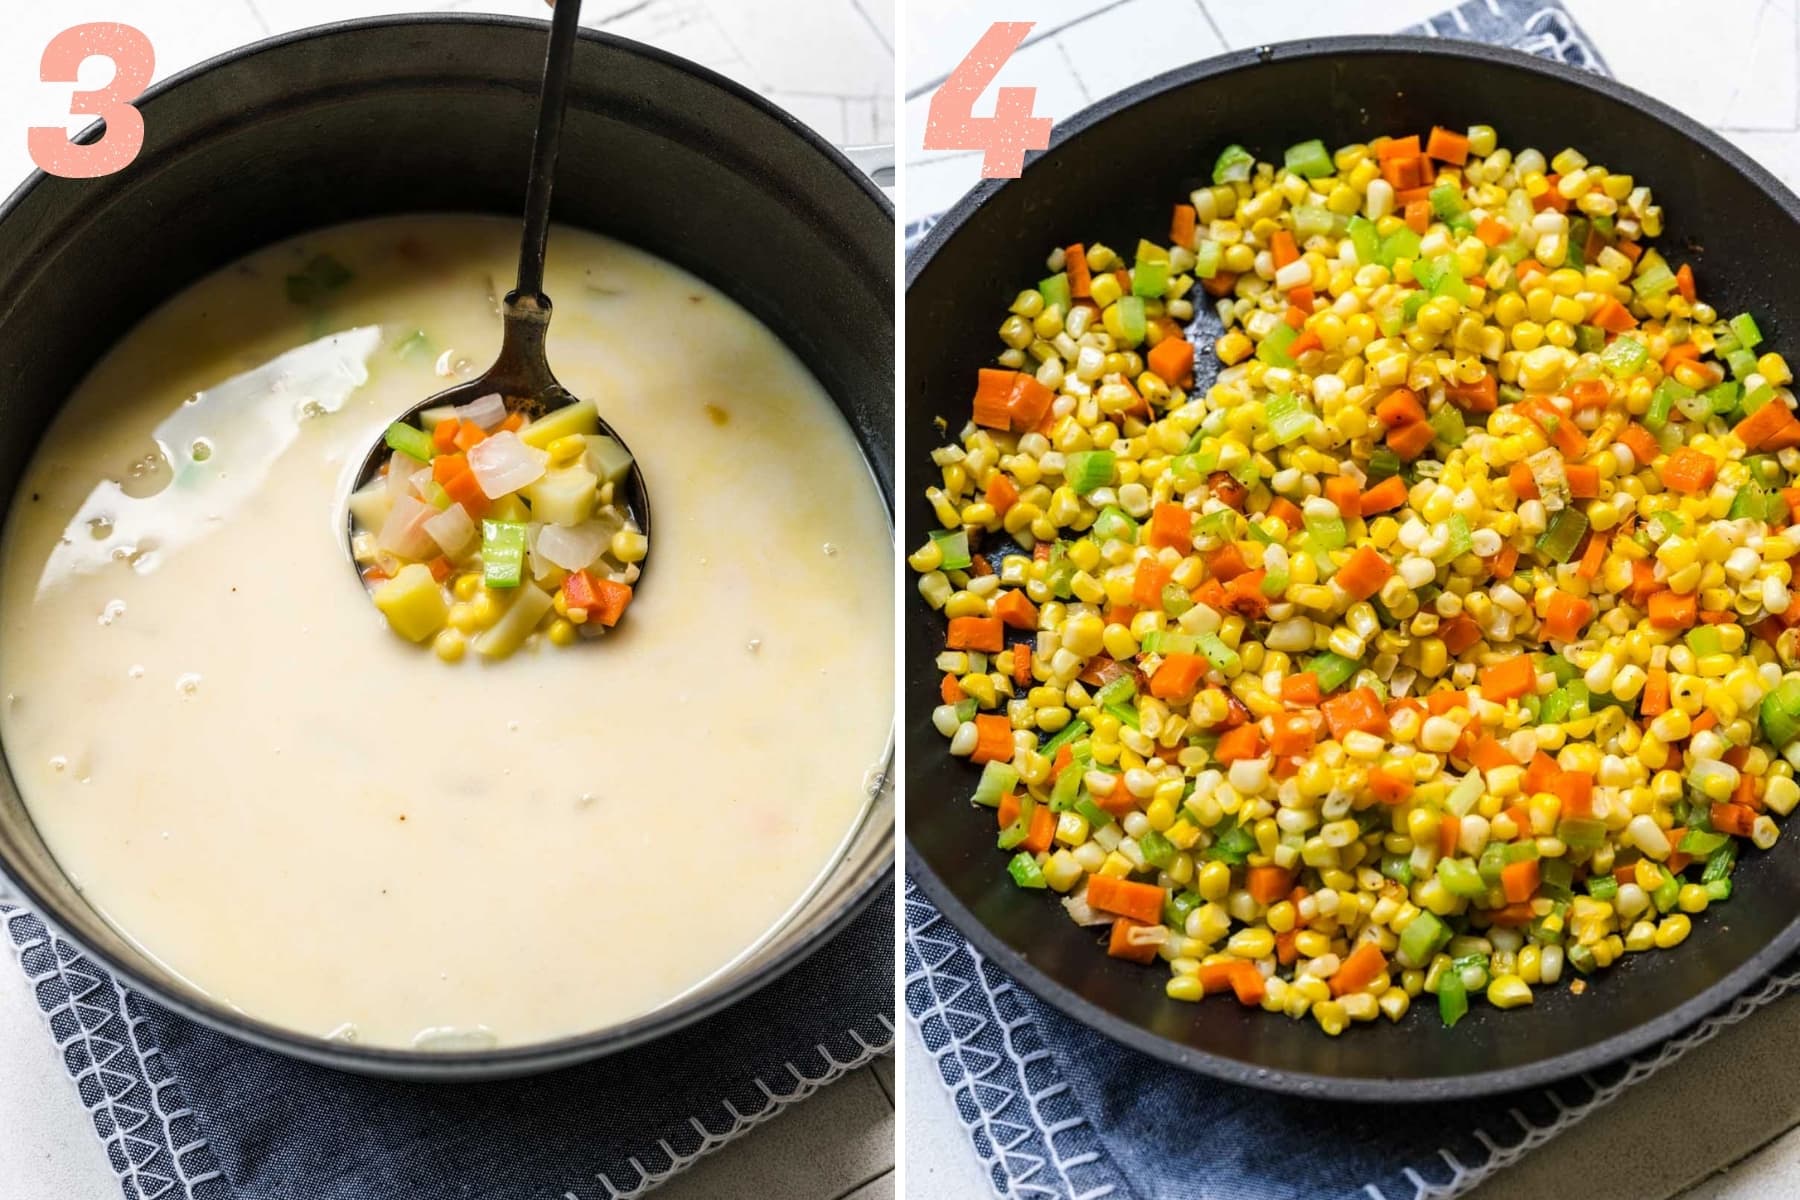 on the left: corn chowder in pot. on the right: sauteed corn, carrot and celery in pan. 